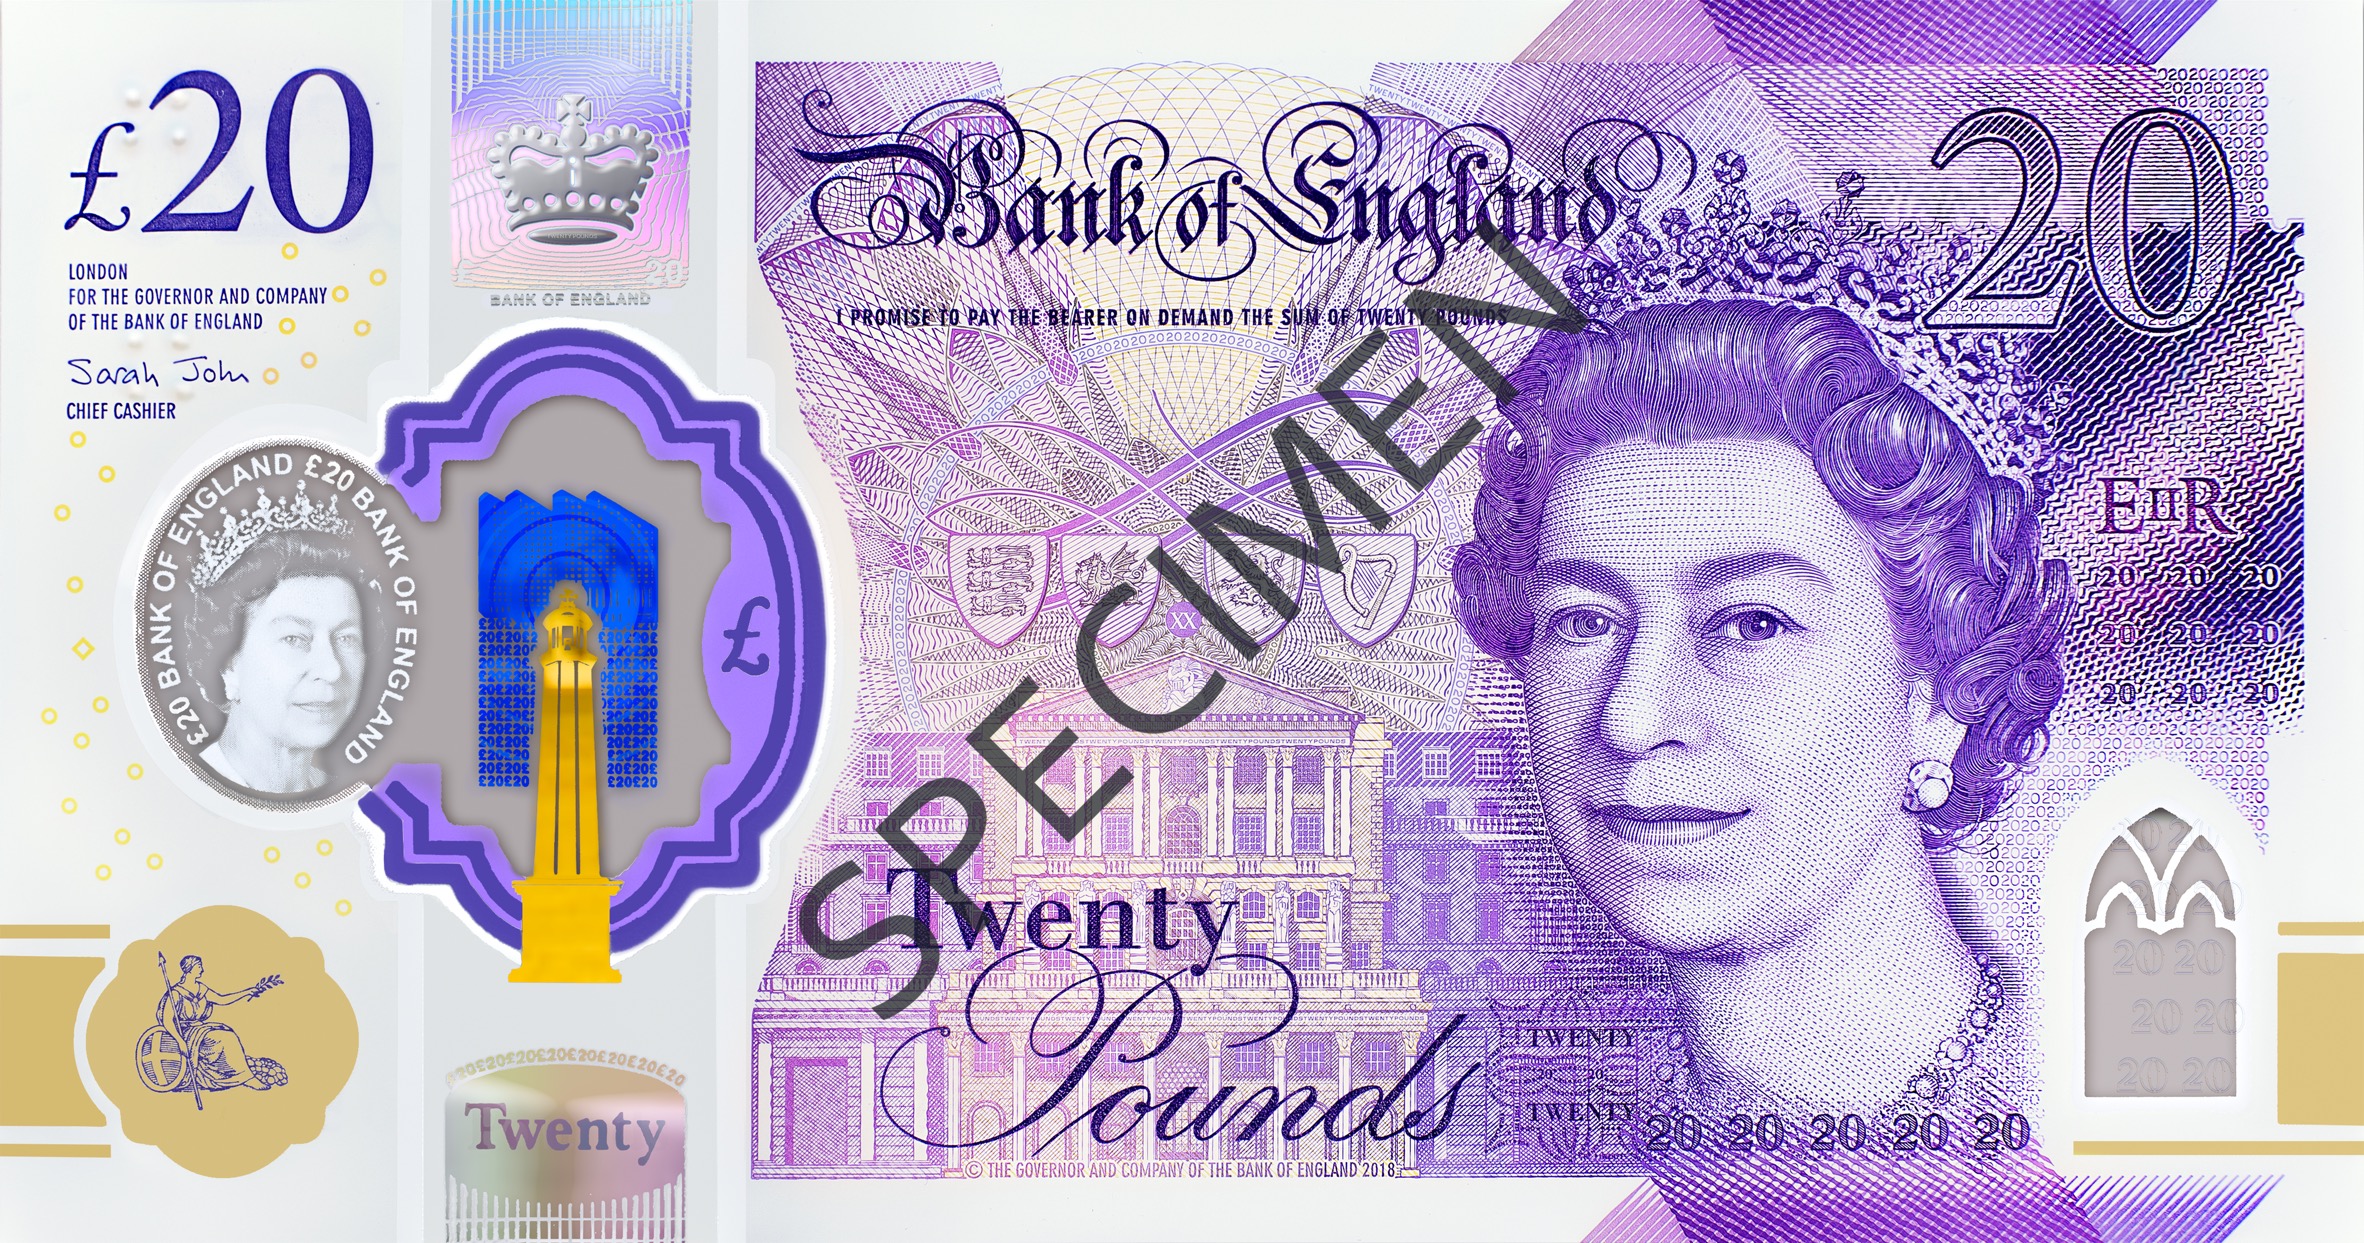 Britain's new £20 note is its "most secure" to date